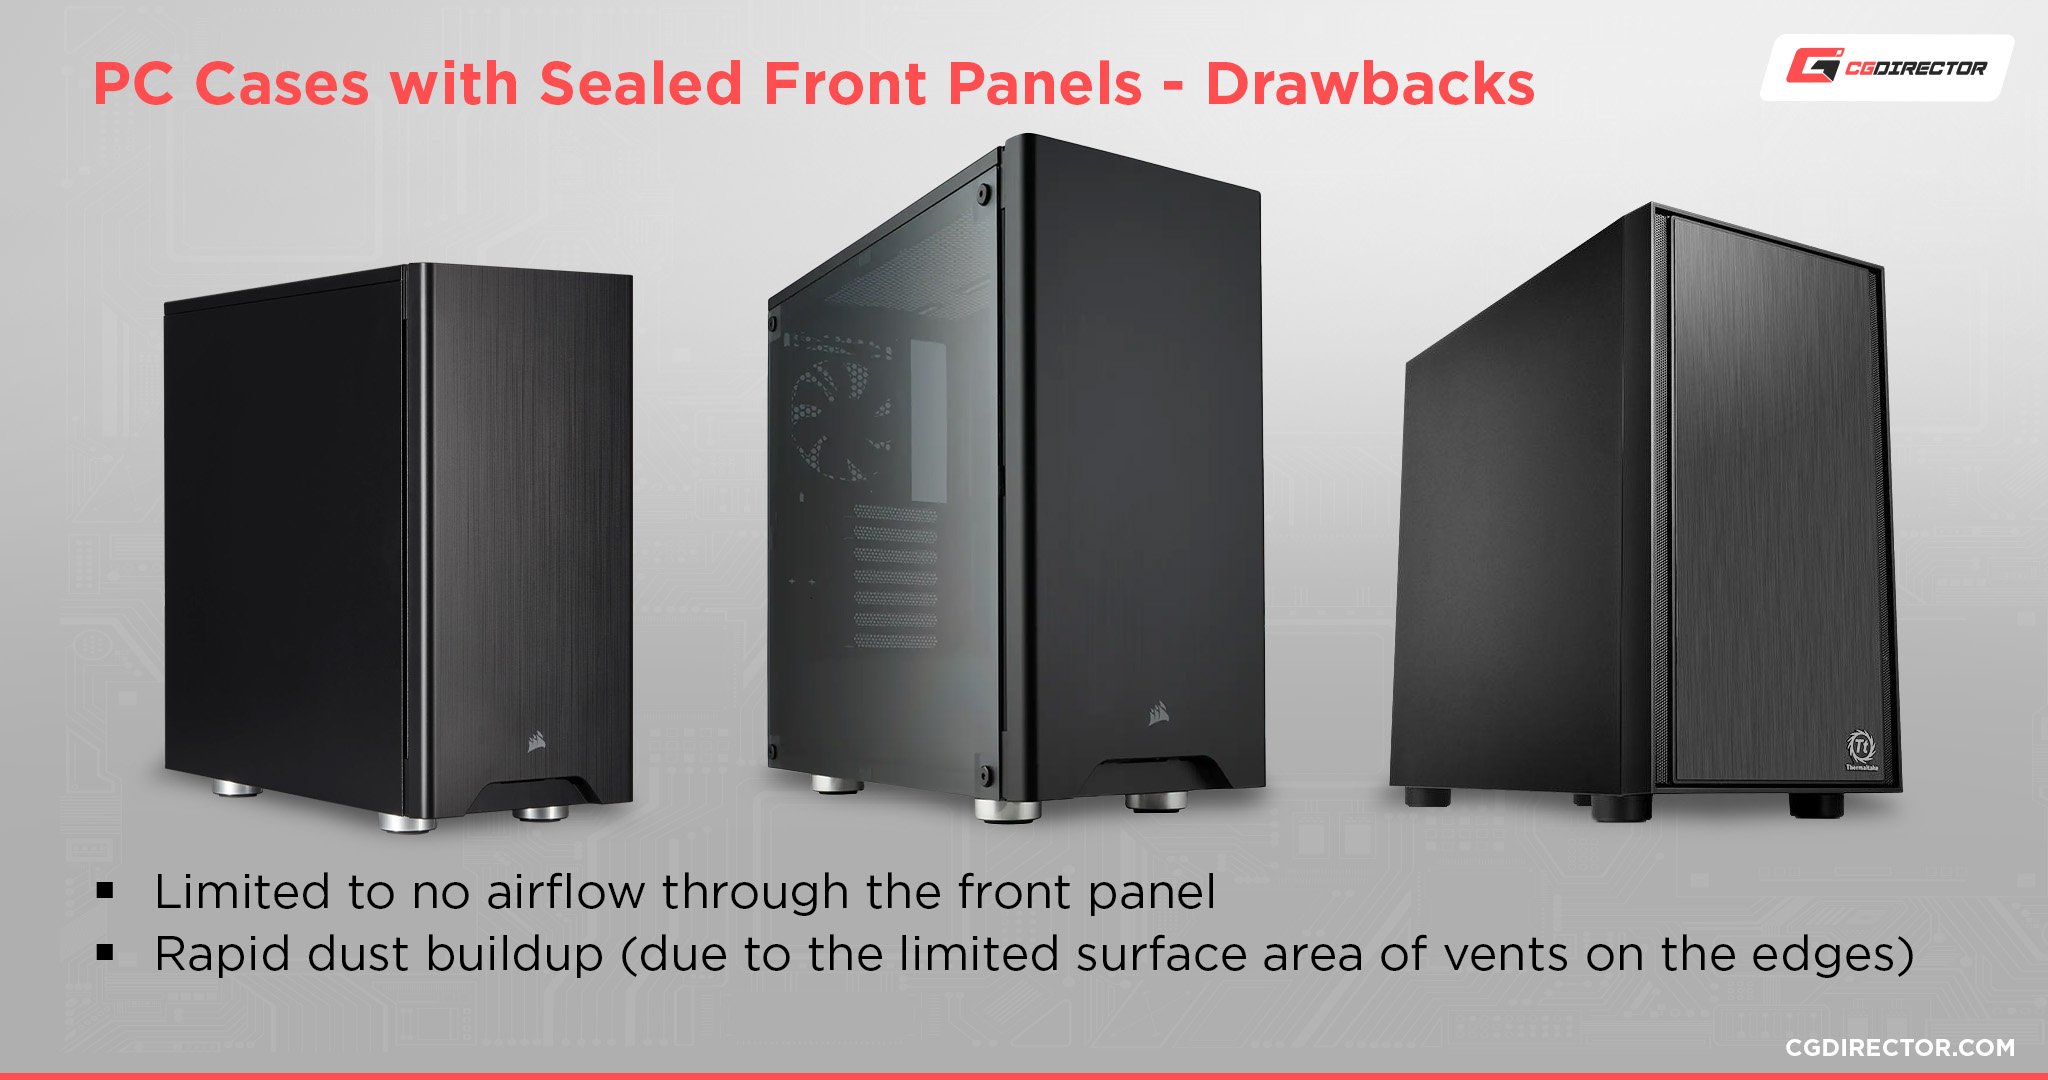 PC Cases with Sealed Front Panels - Drawbacks